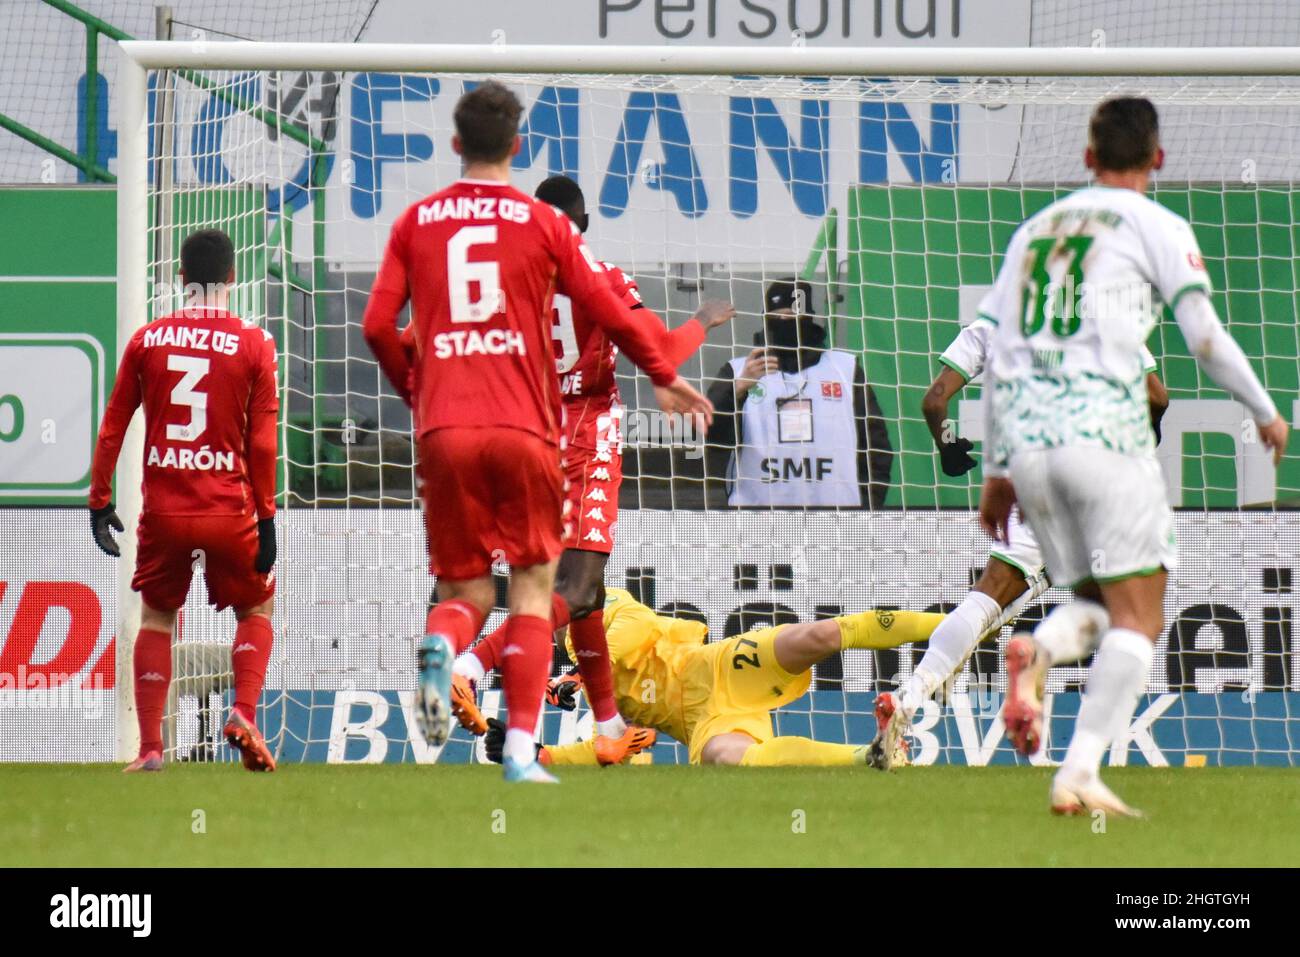 Germany ,Fuerth, Sportpark Ronhof Thomas Sommer - 22 Jan 2022 - Fussball, 1.Bundesliga - SpVgg Greuther Fuerth vs. FSV Mainz 05  Image: Jeremy Dudziak (SpVgg Greuther Fürth,28) shooting the 1:0 goal passed GK Robin Zentner (Mainz, 27) in the 12th minute.  DFL regulations prohibit any use of photographs as image sequences and or quasi-video Stock Photo